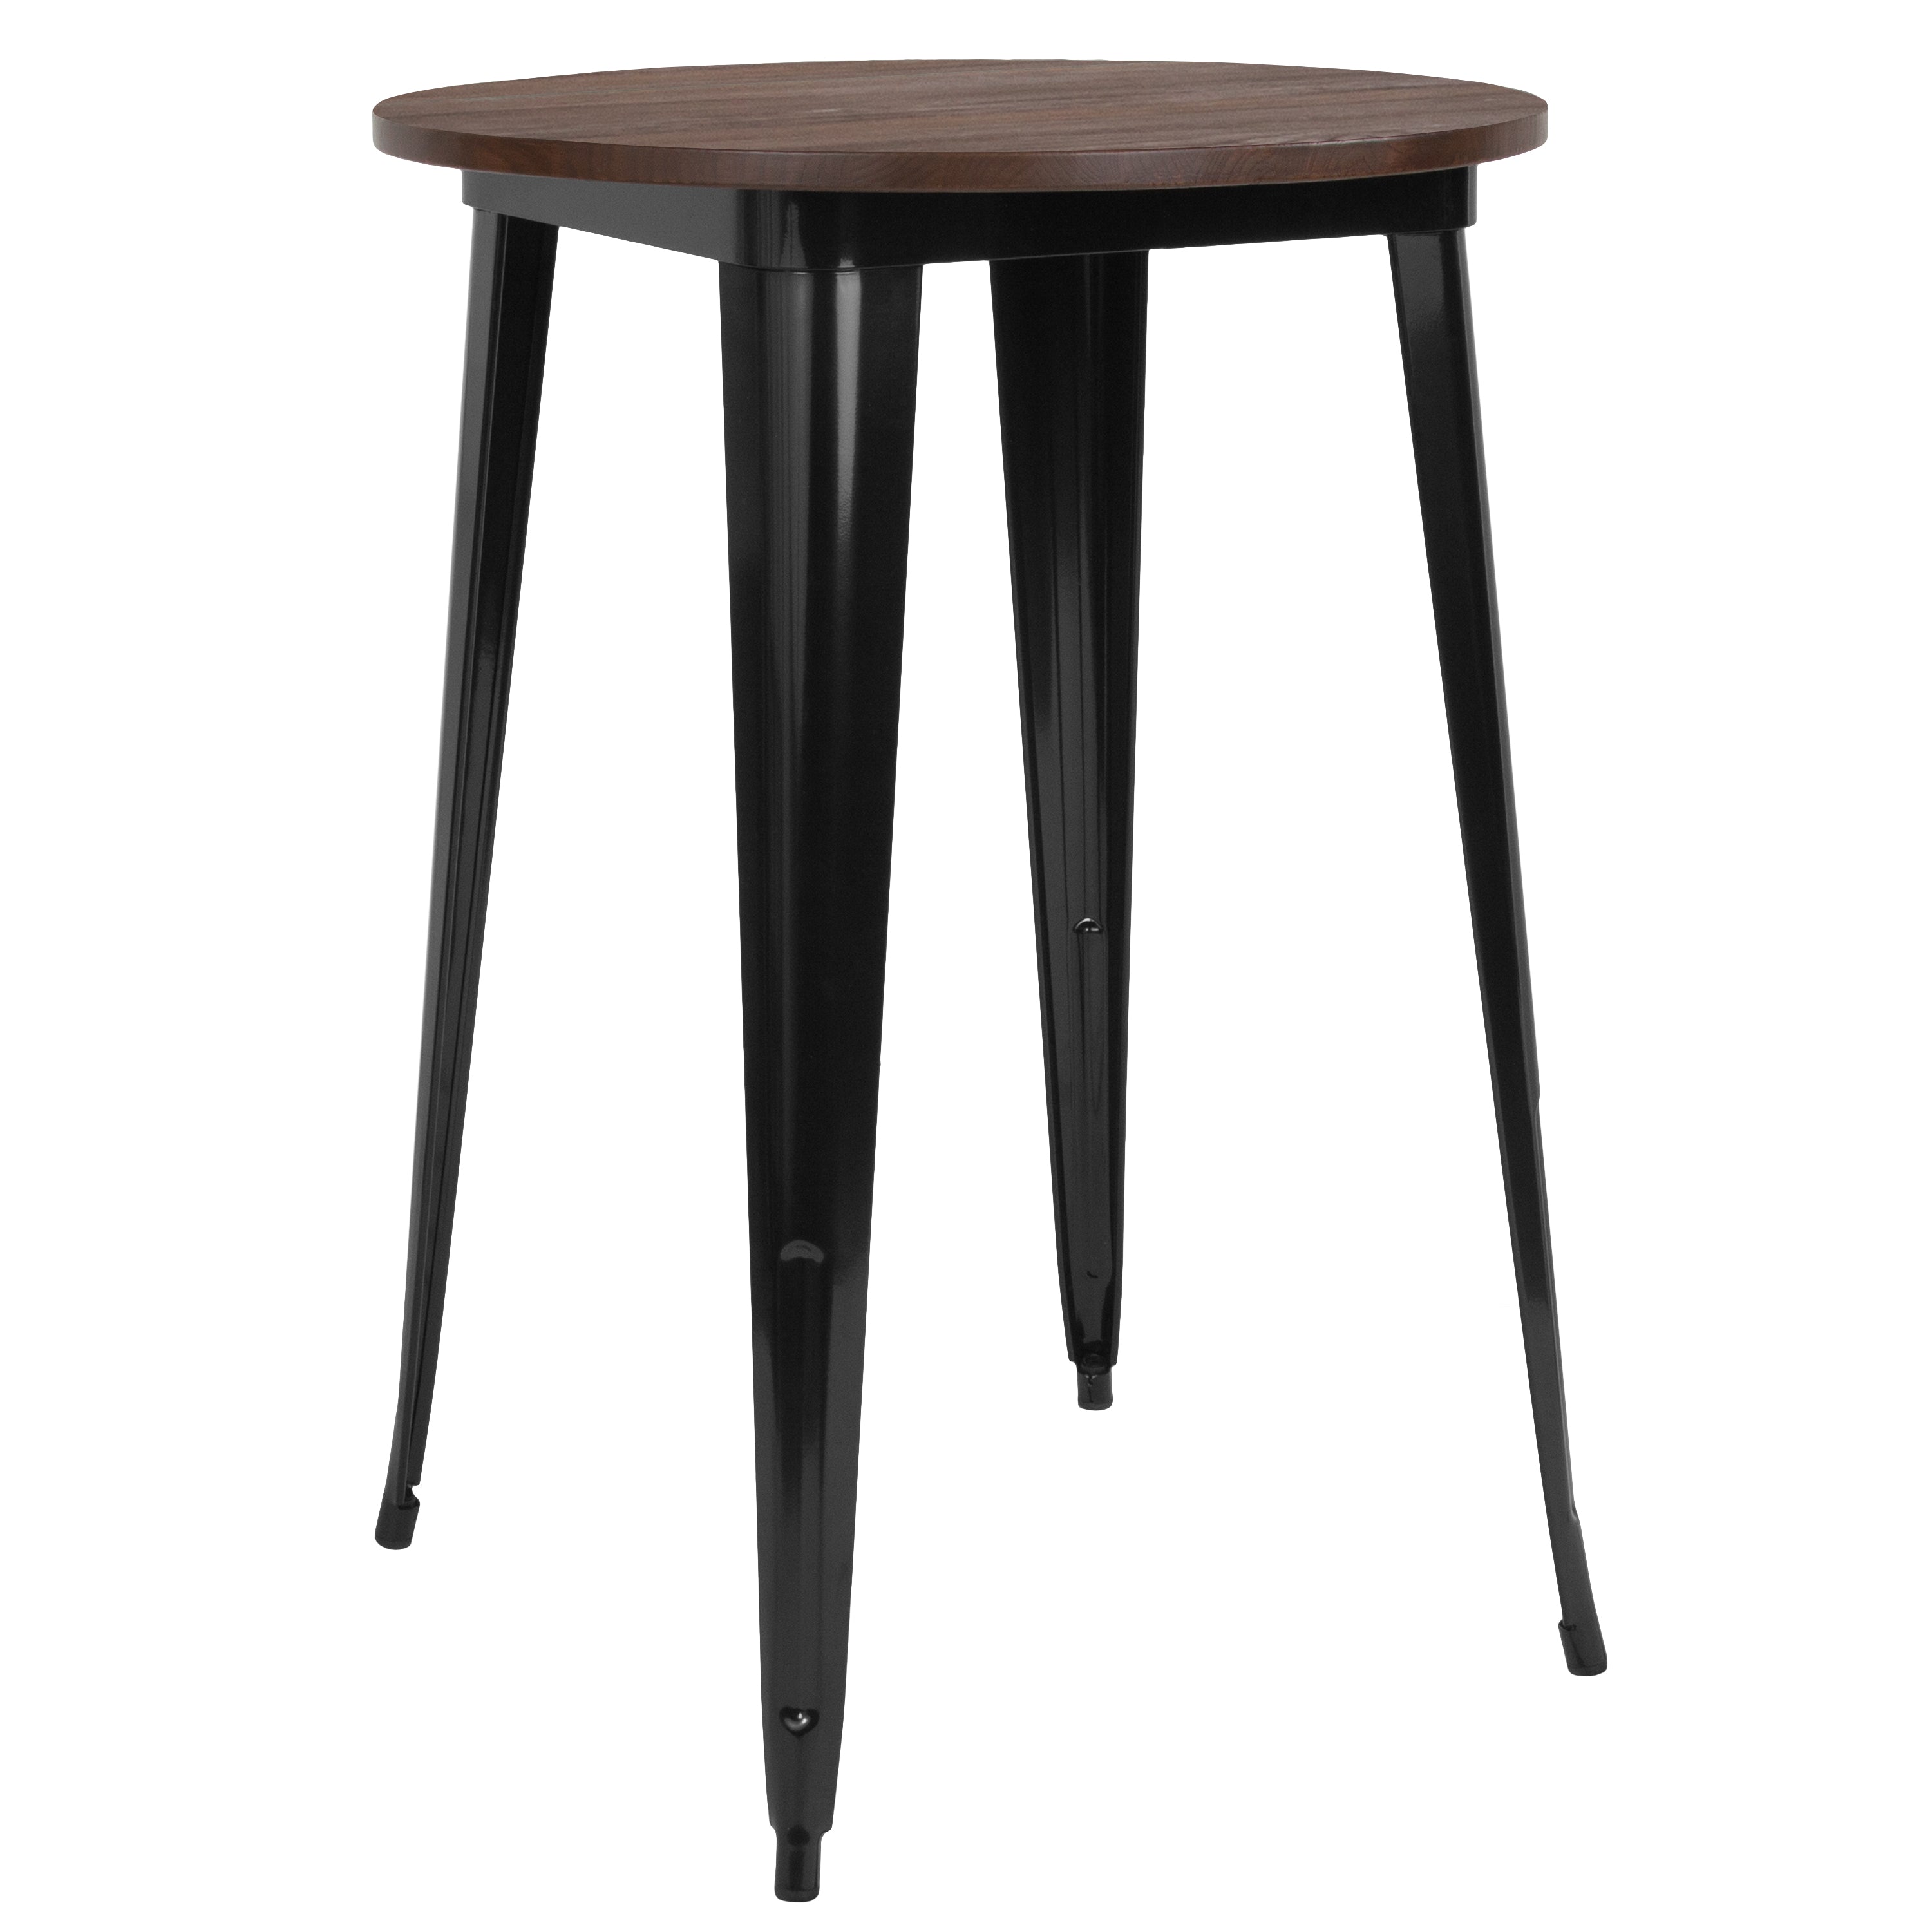 30" Round Metal Indoor Bar Height Table with Rustic Wood Top-Metal/ Colorful Restaurant Table-Flash Furniture-Wall2Wall Furnishings